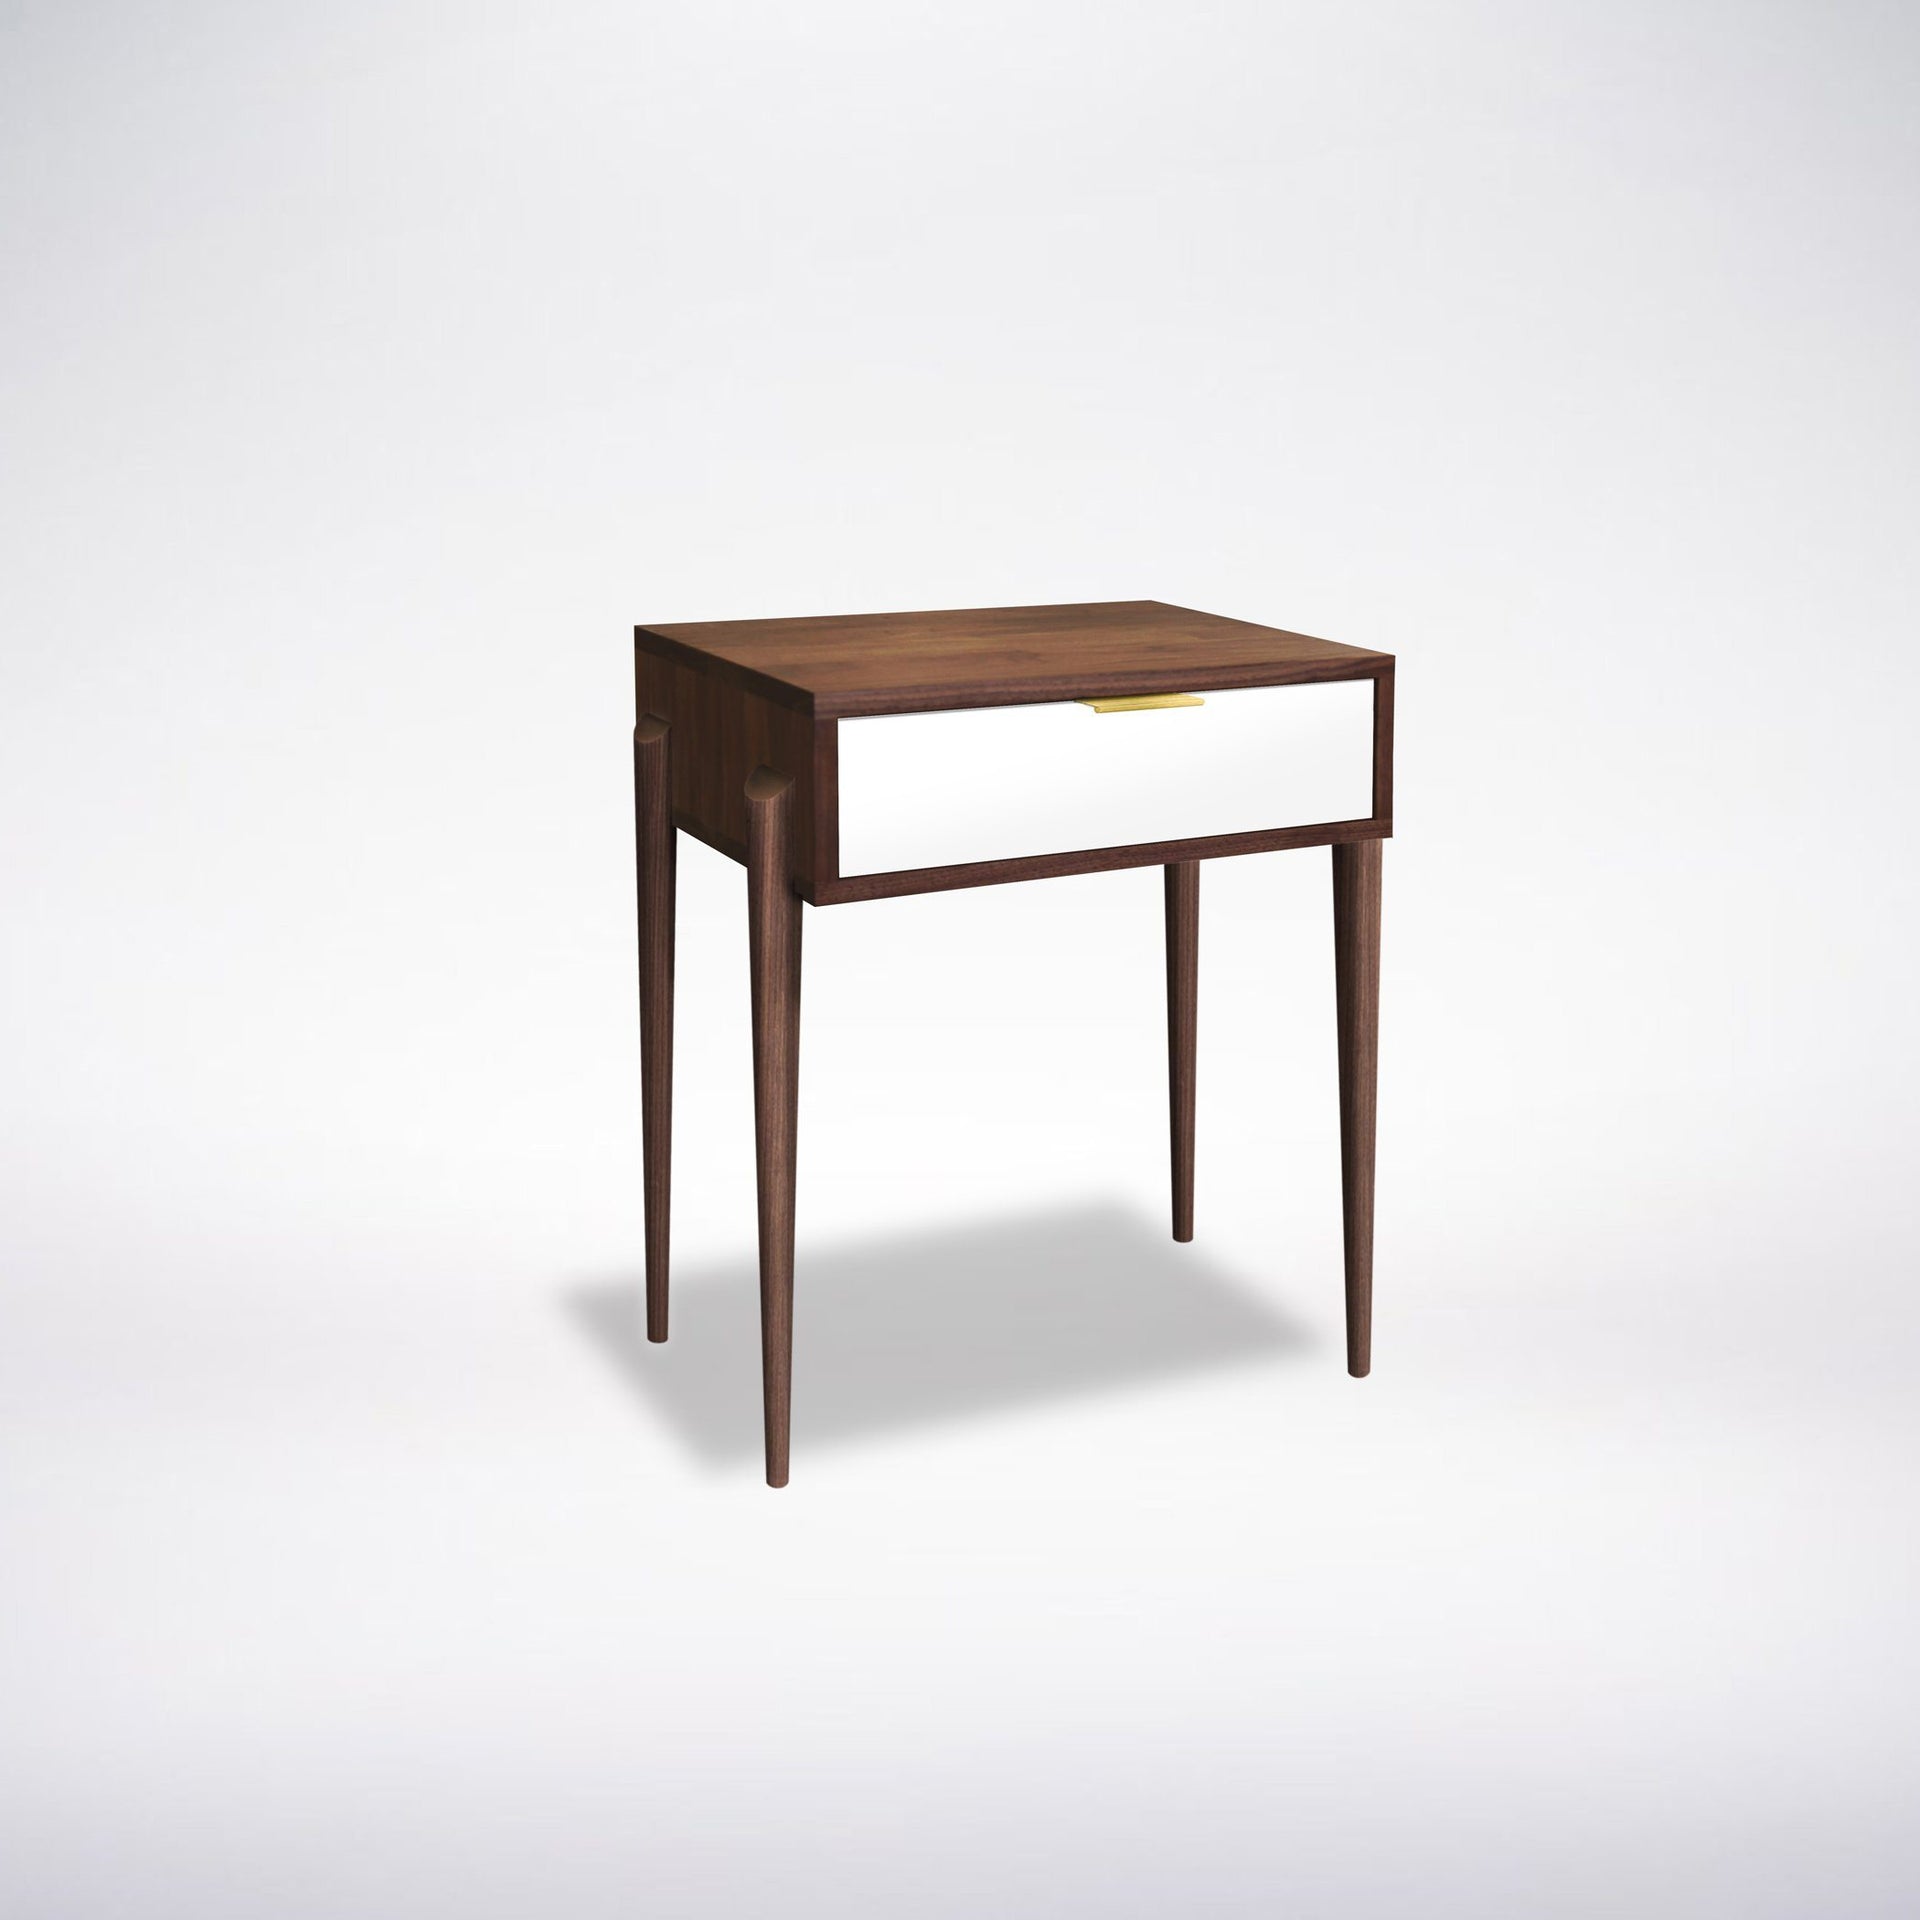 Solid wood side table with a white drawer face